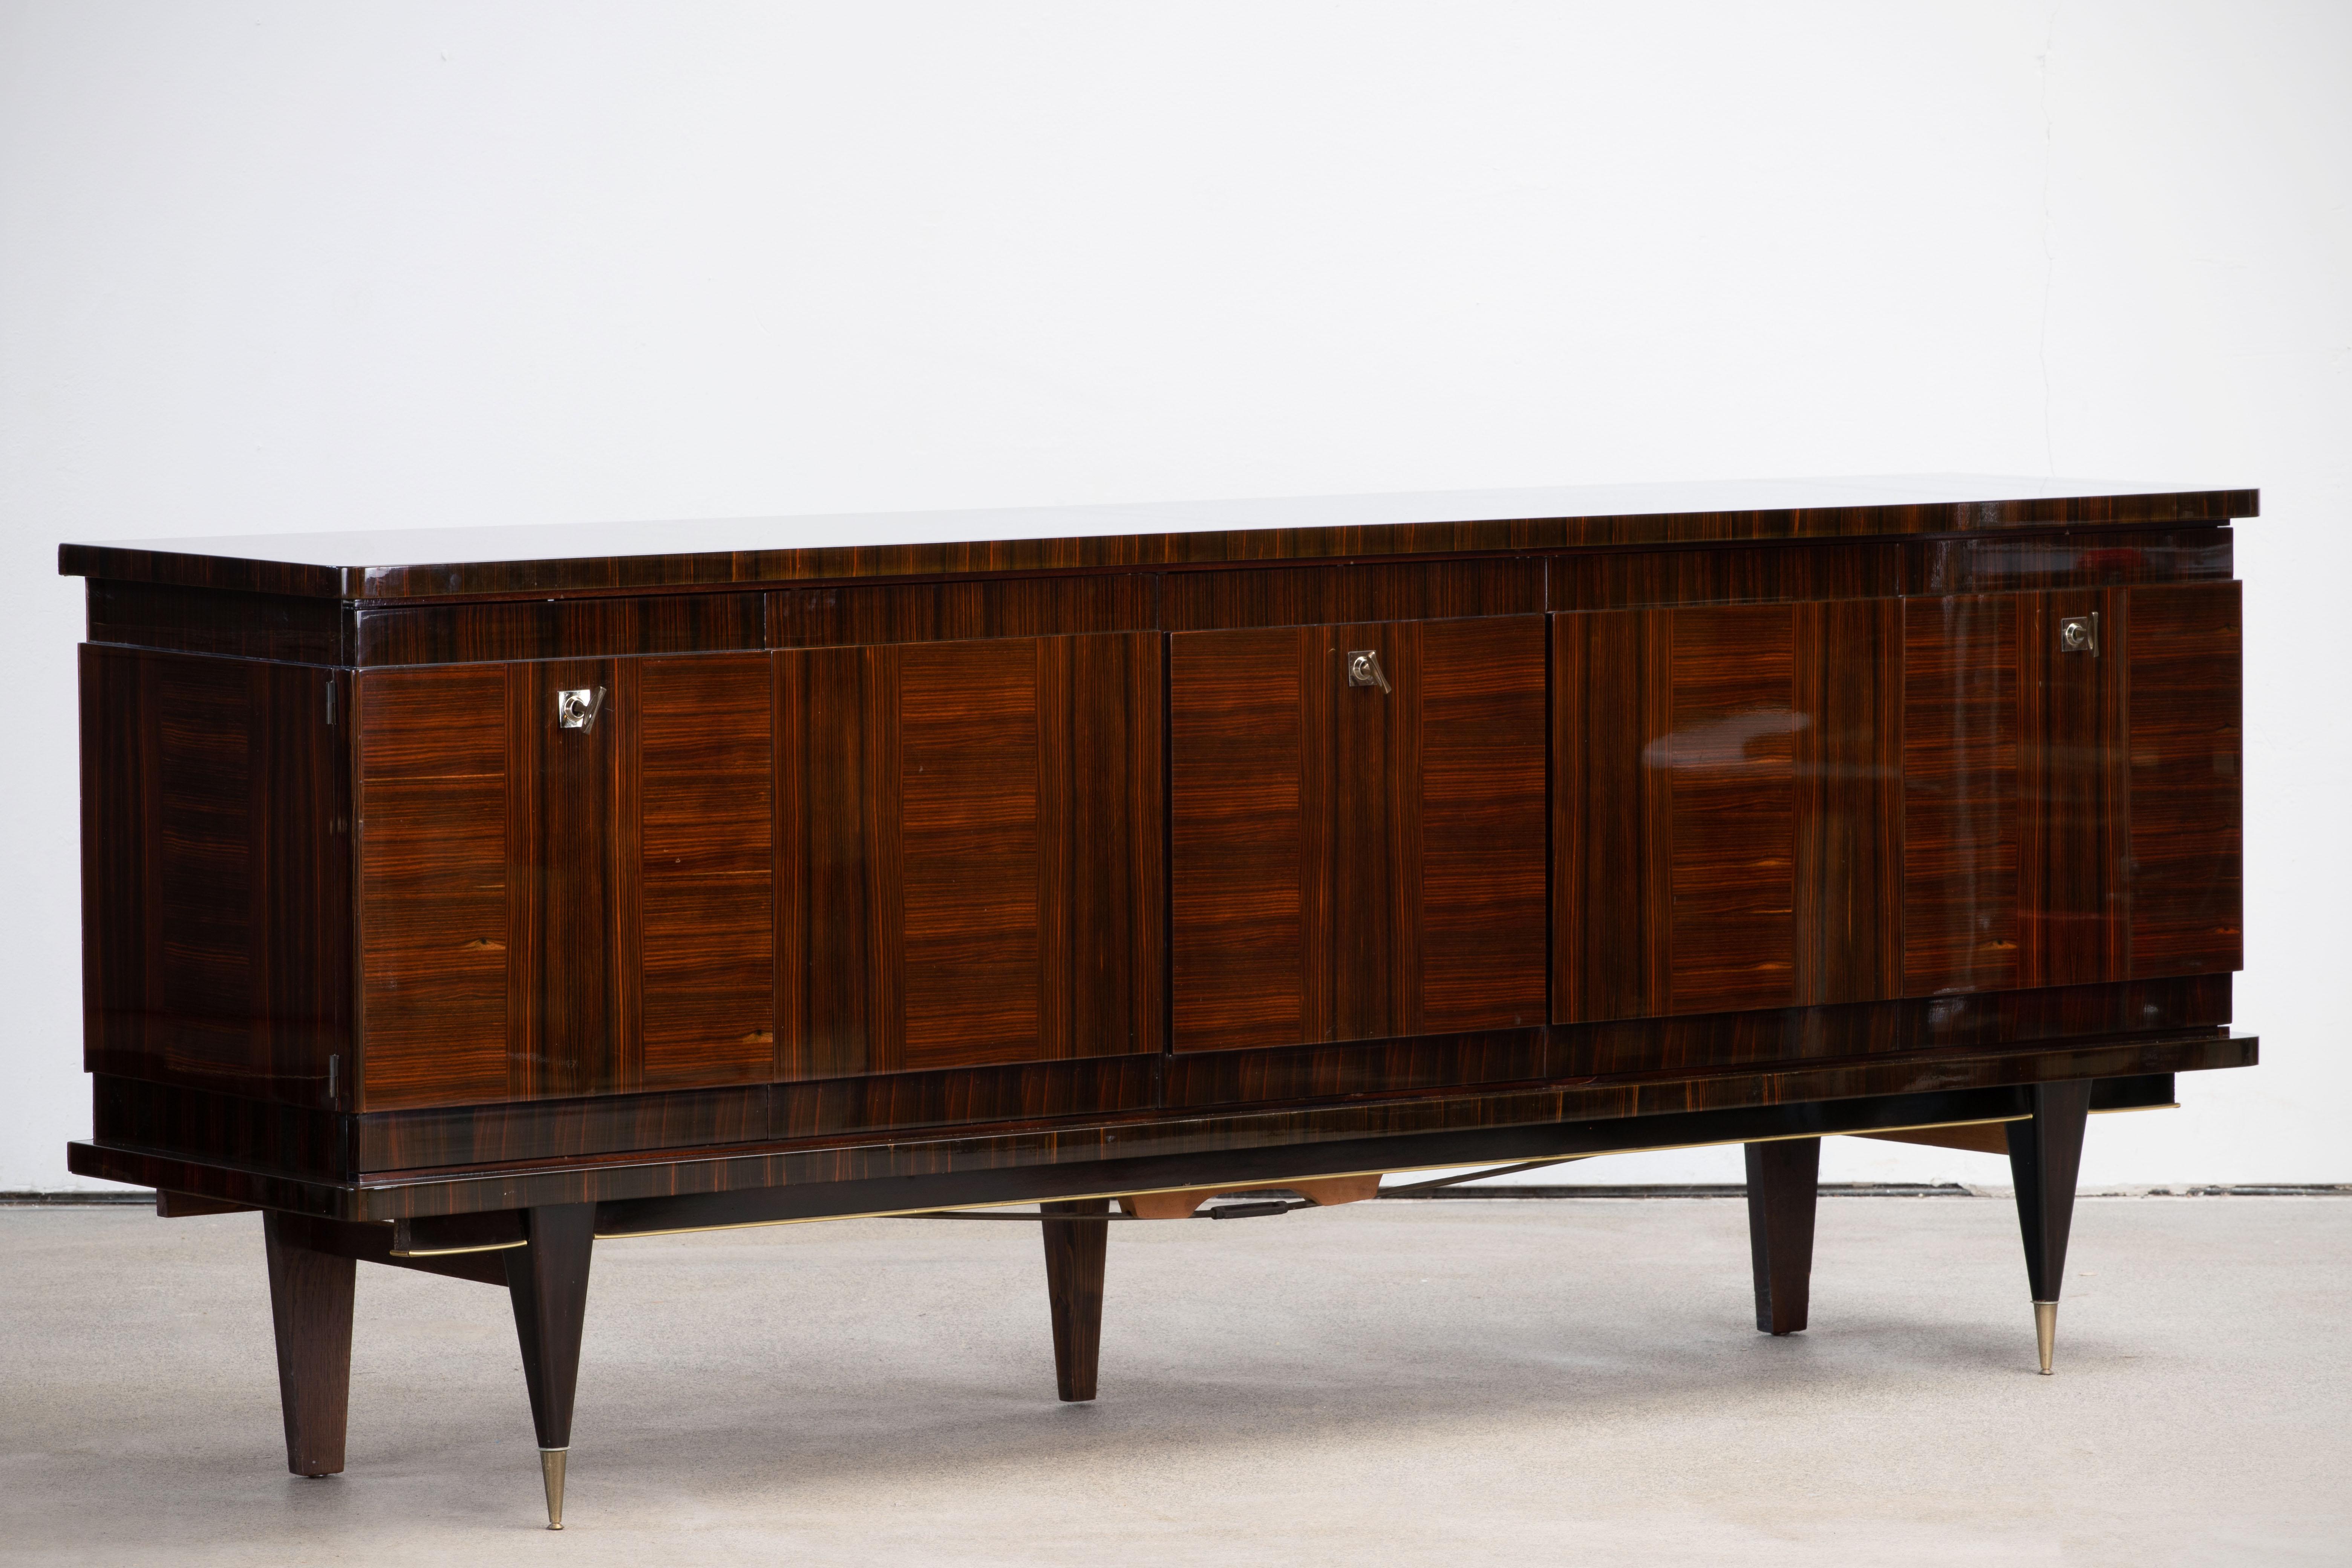 French Art Deco sideboard, credenza. The sideboard features stunning Macassar wood grain with a geometric pattern in the center. It offers ample storage, with shelve behind the doors. Both sides of the cabinet lock, and three keys are included. The